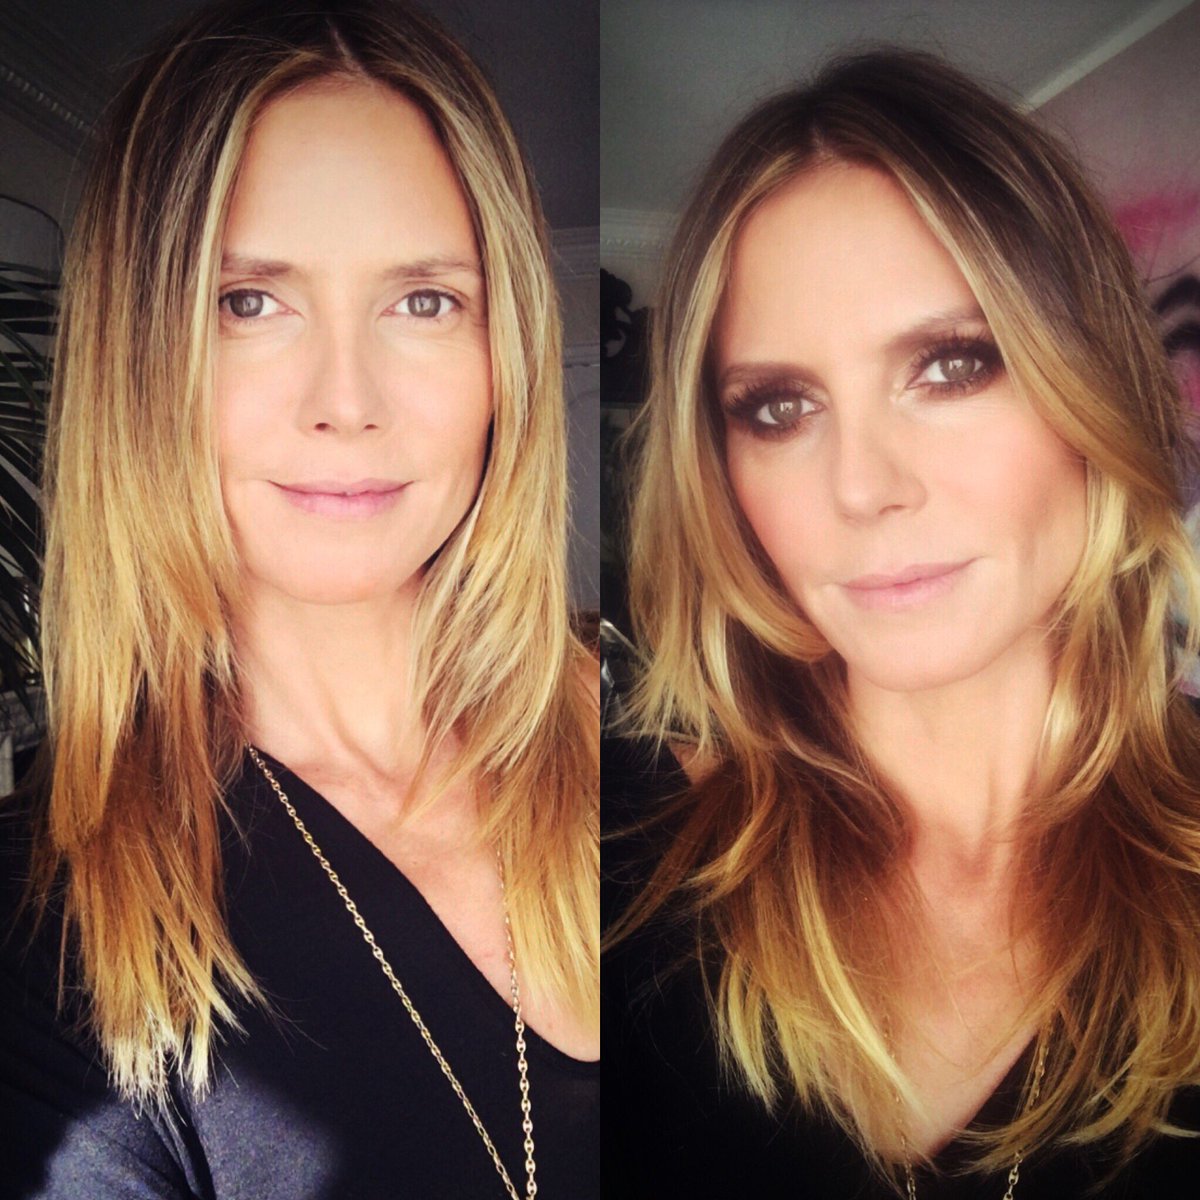 Before and after #grammys ????????????????????????
@lindahaymakeup @wendyiles_hair https://t.co/2kOmX1P3J4